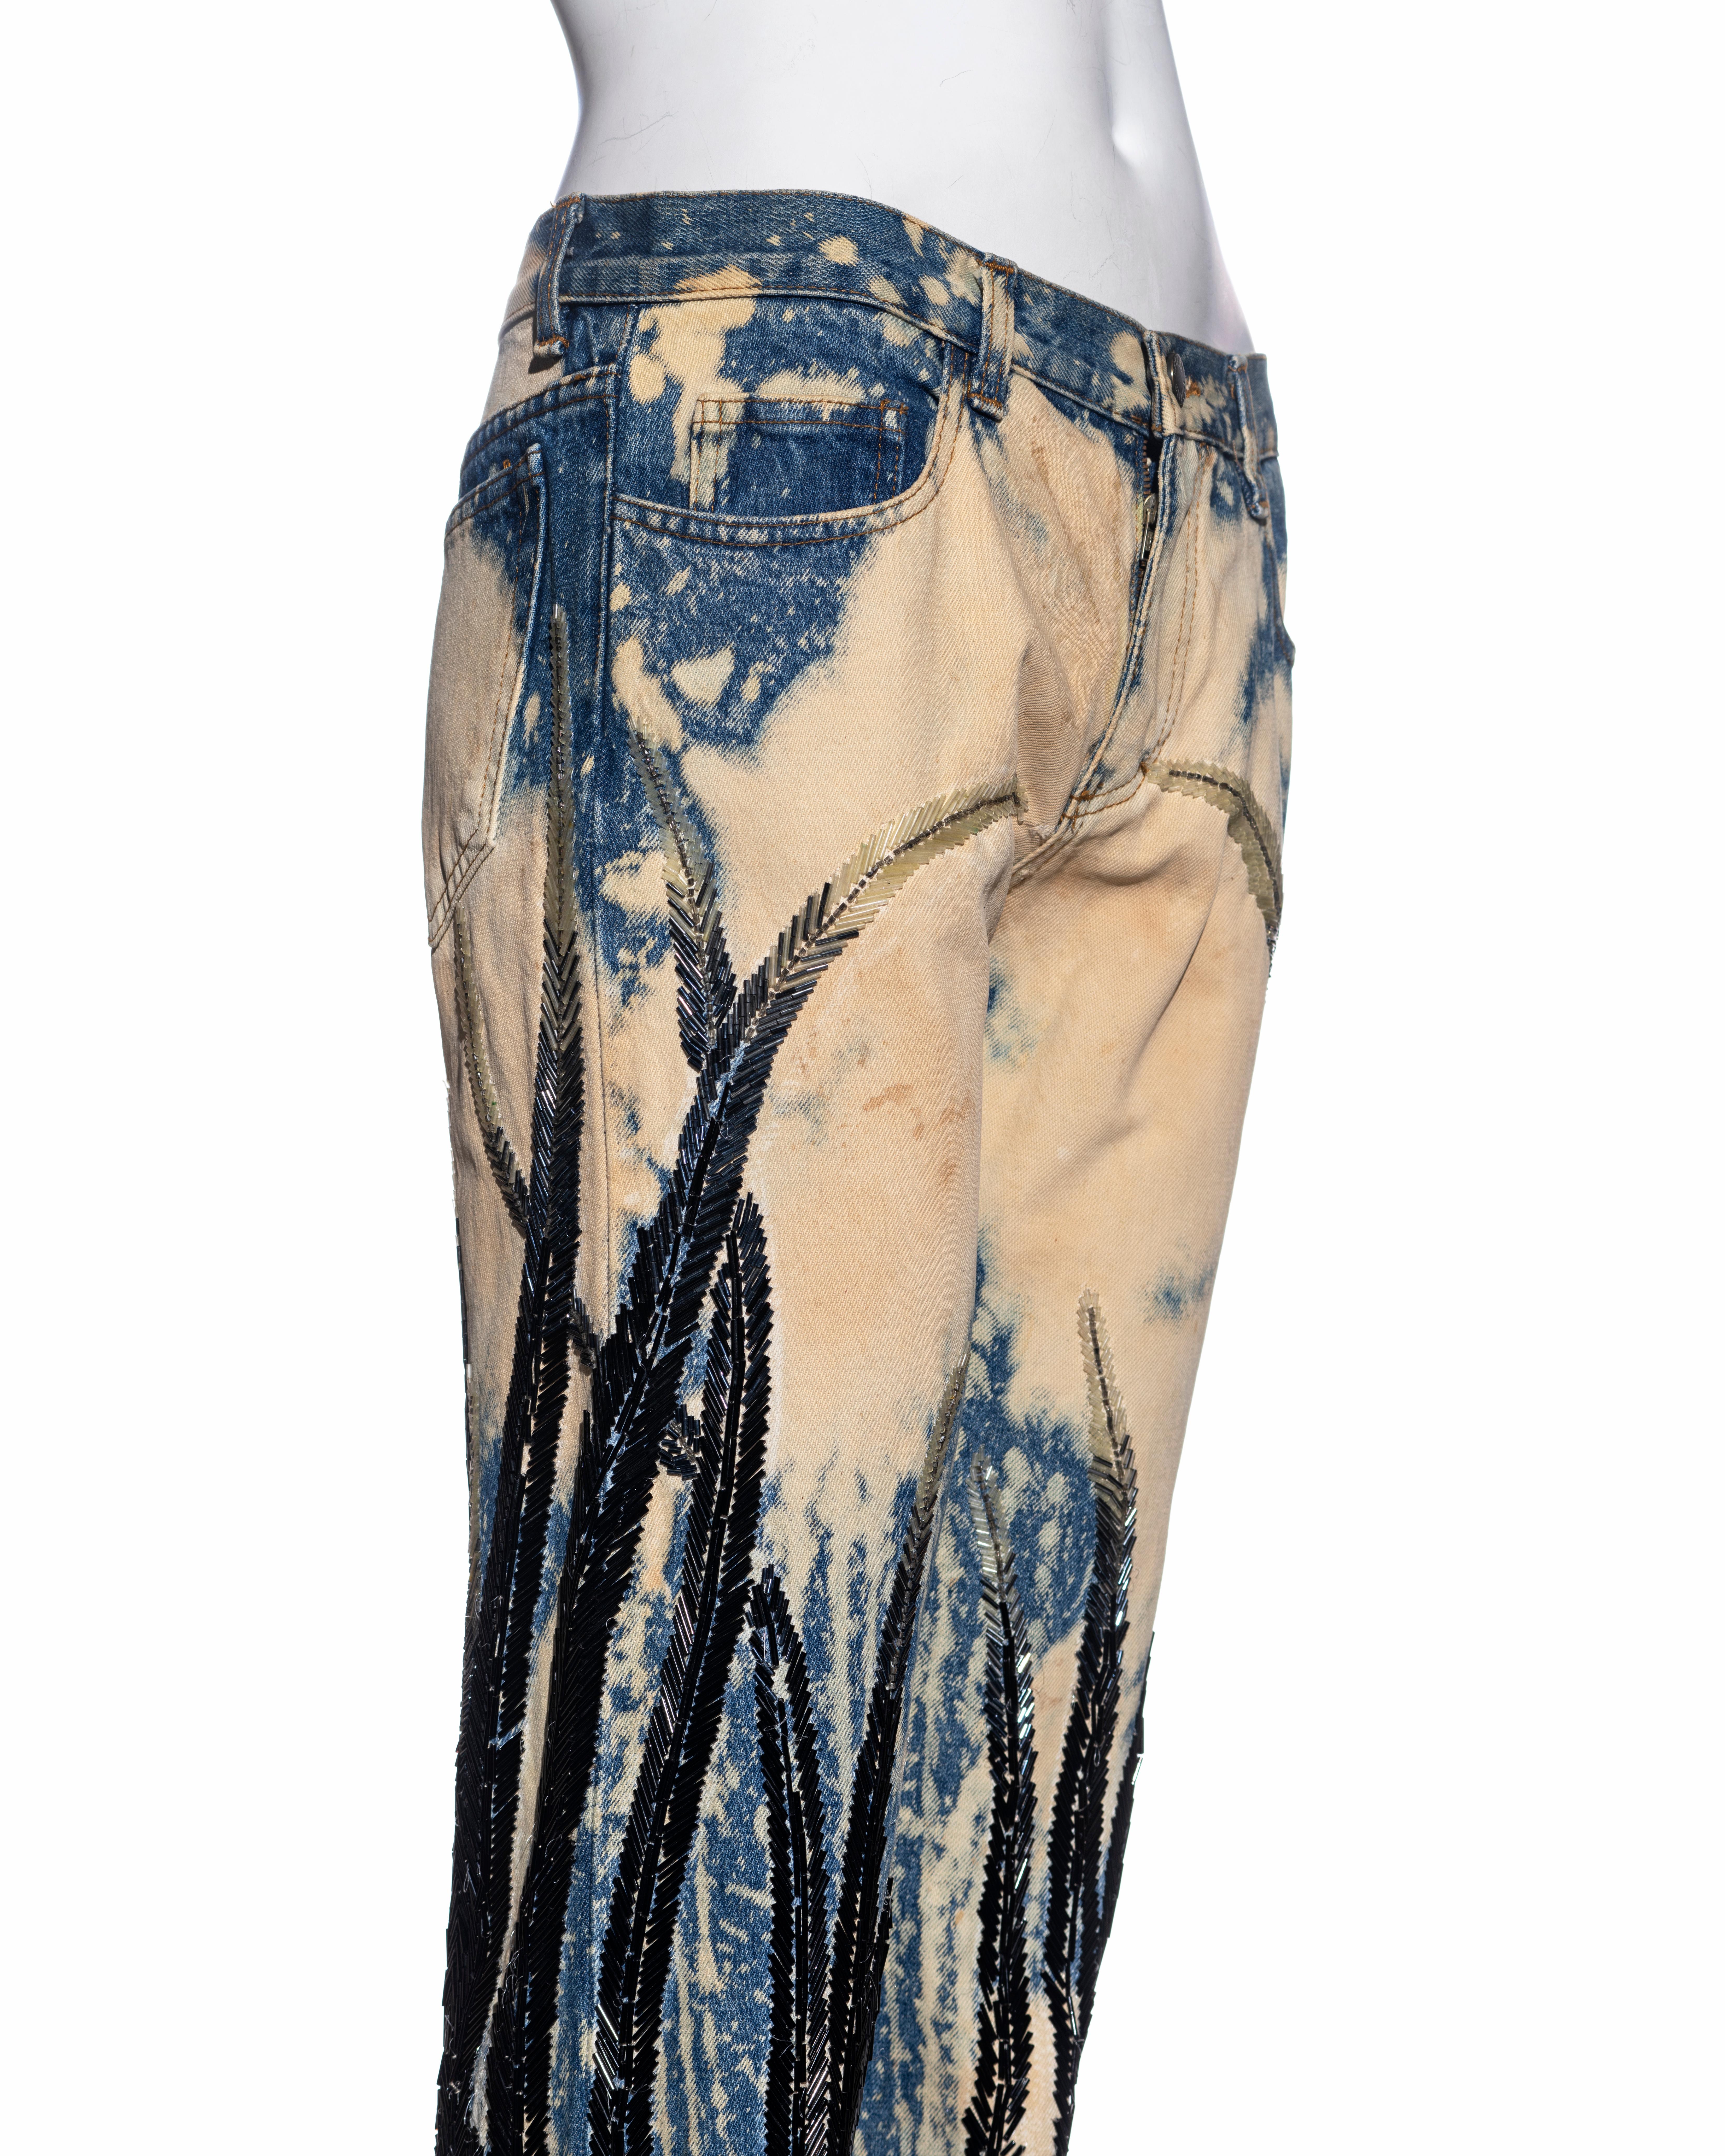 Black Roberto Cavalli bleached denim beaded jeans with feather embellishments, fw 2001